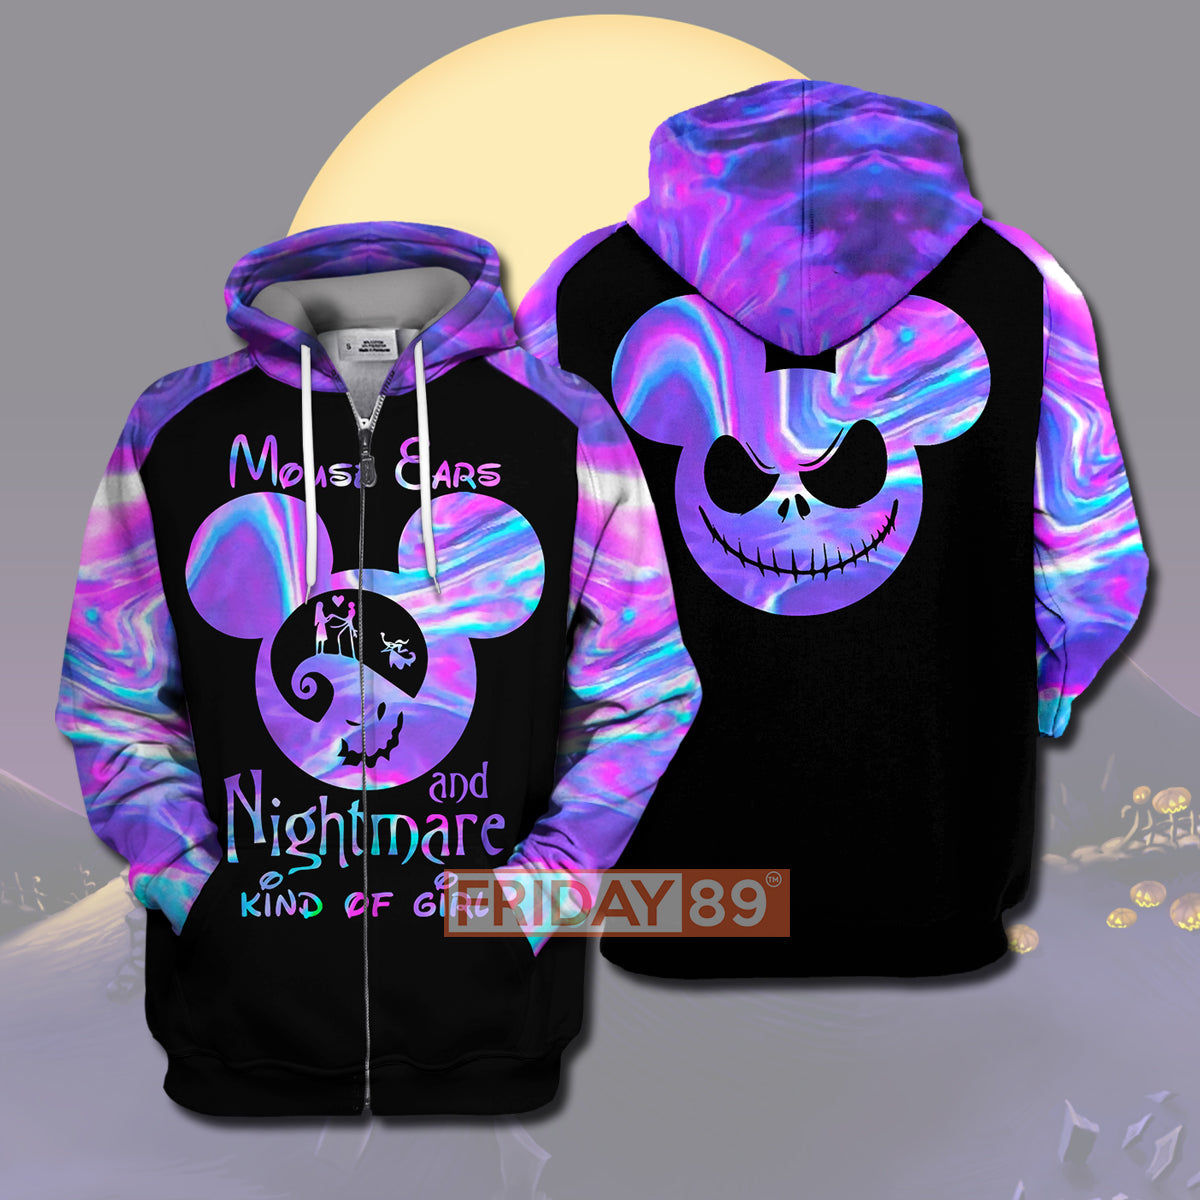 Unifinz DN T-shirt Mouse Ears And Nightmare Kind Of Girl 3D PRINT T-shirt Awesome High Quality DN TNBC Hoodie Sweater Tank 2026